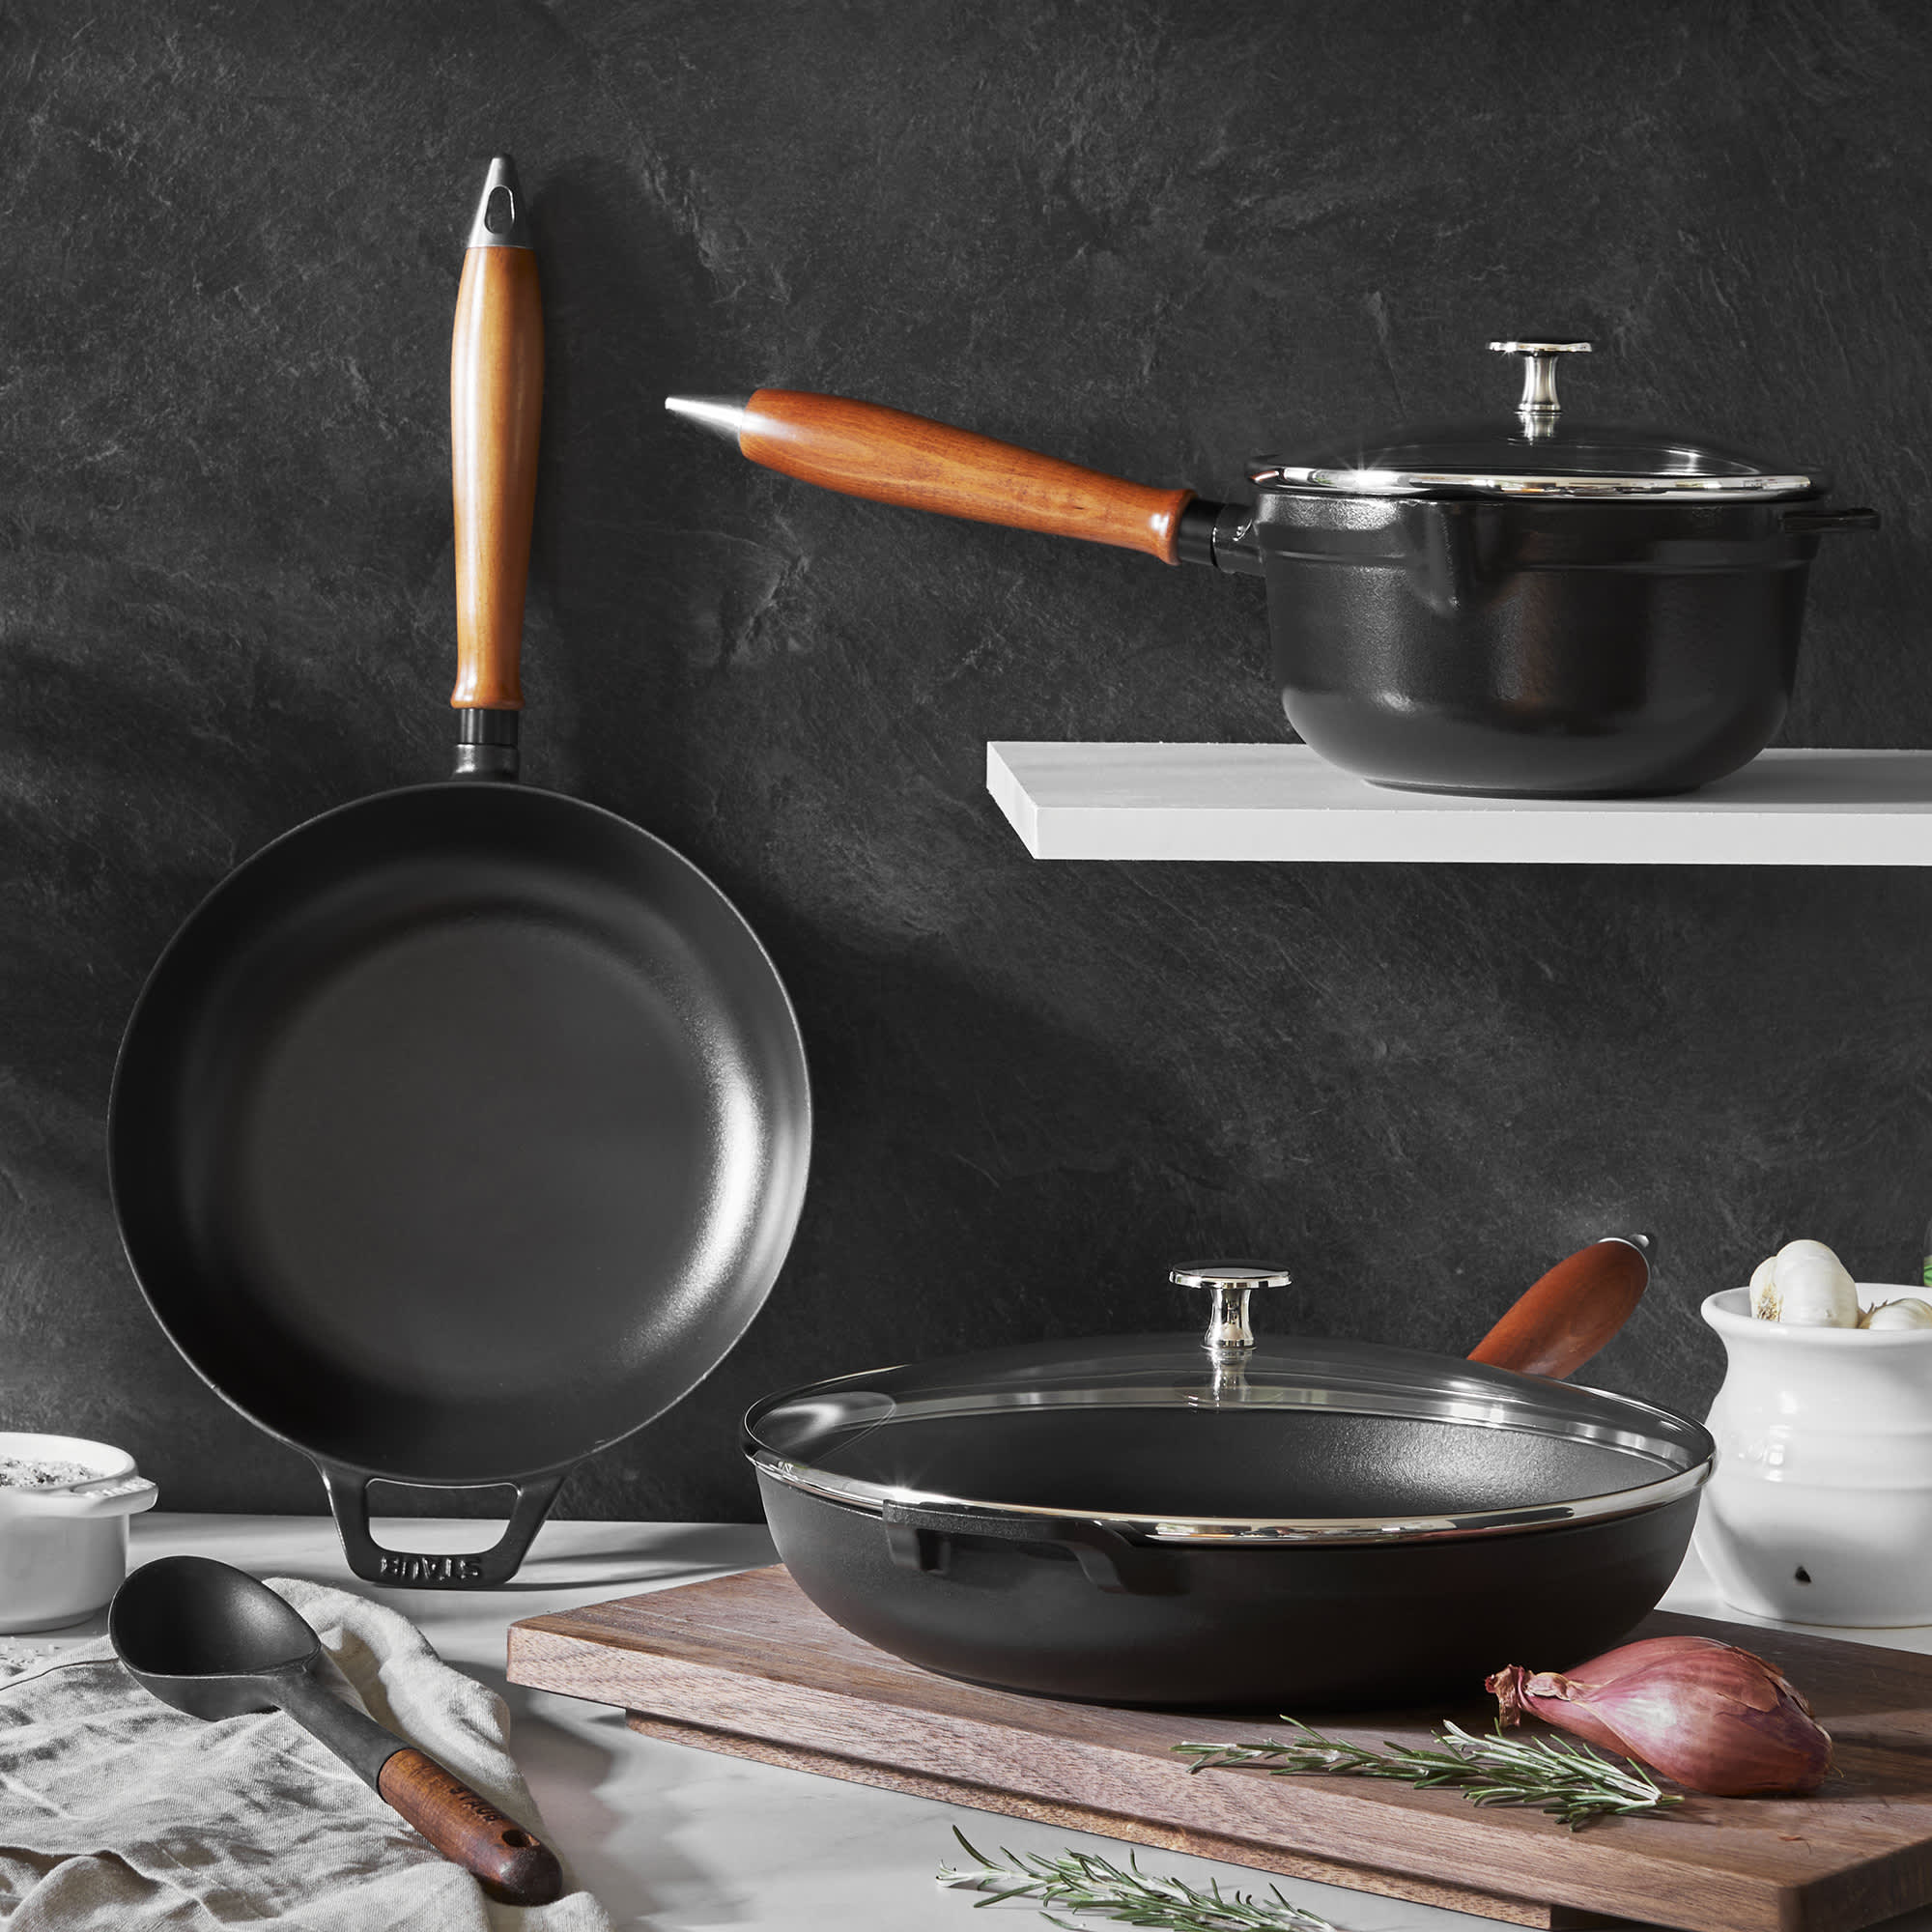 There's A Ton Of Staub Cookware On Sale At Sur La Table